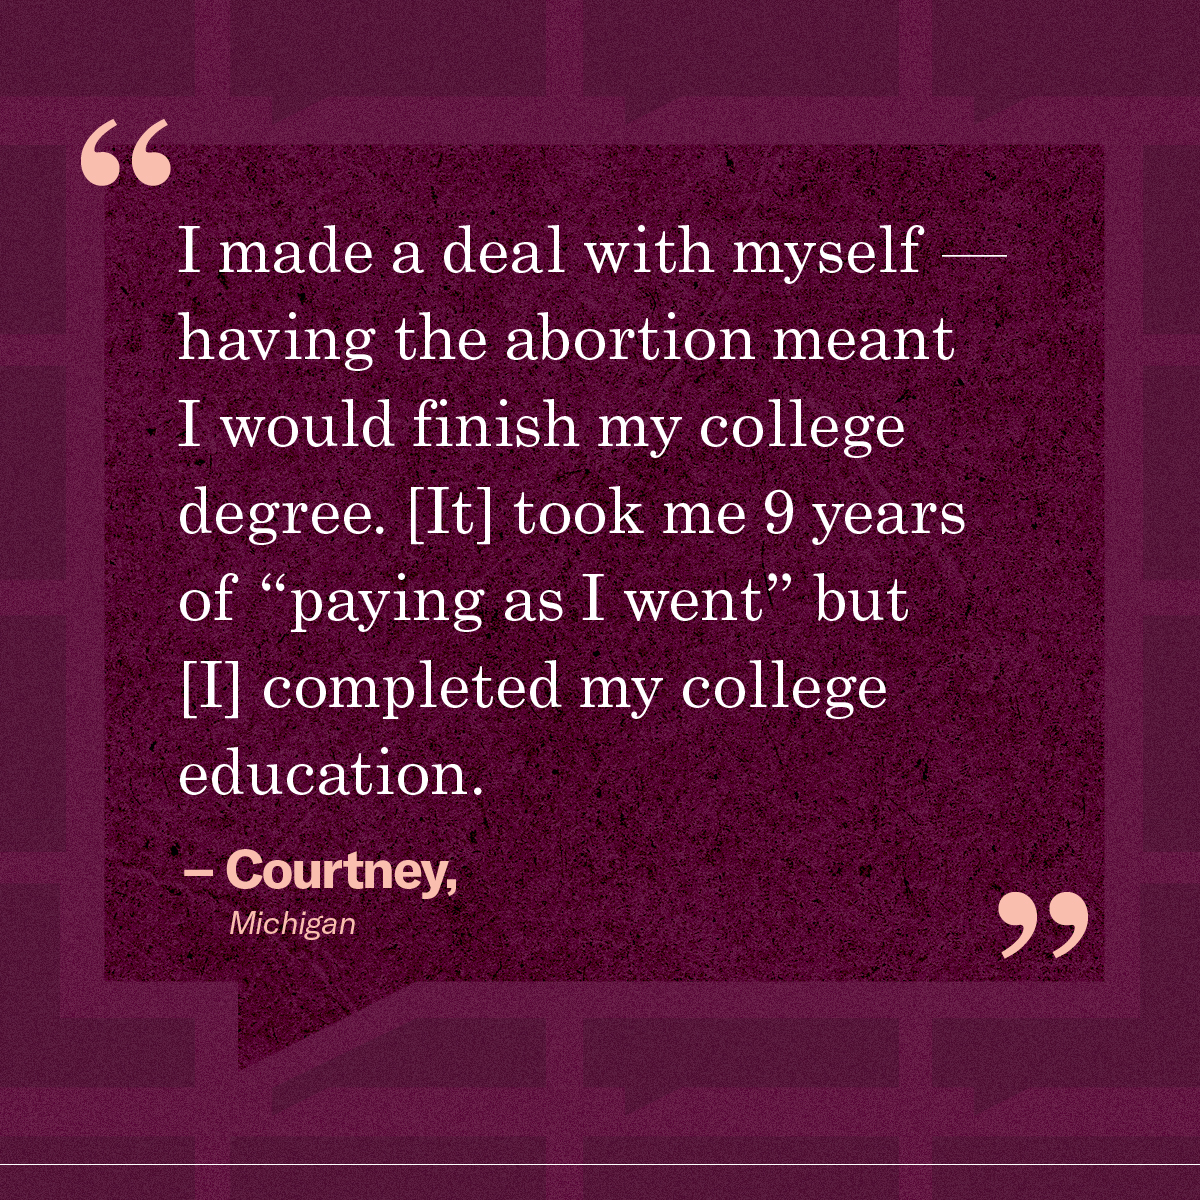 “I made a deal with myself — having the abortion meant I would finish my college degree. [It] took me 9 years of “paying as I went” but [I] completed my college education.” – Courtney, Michigan